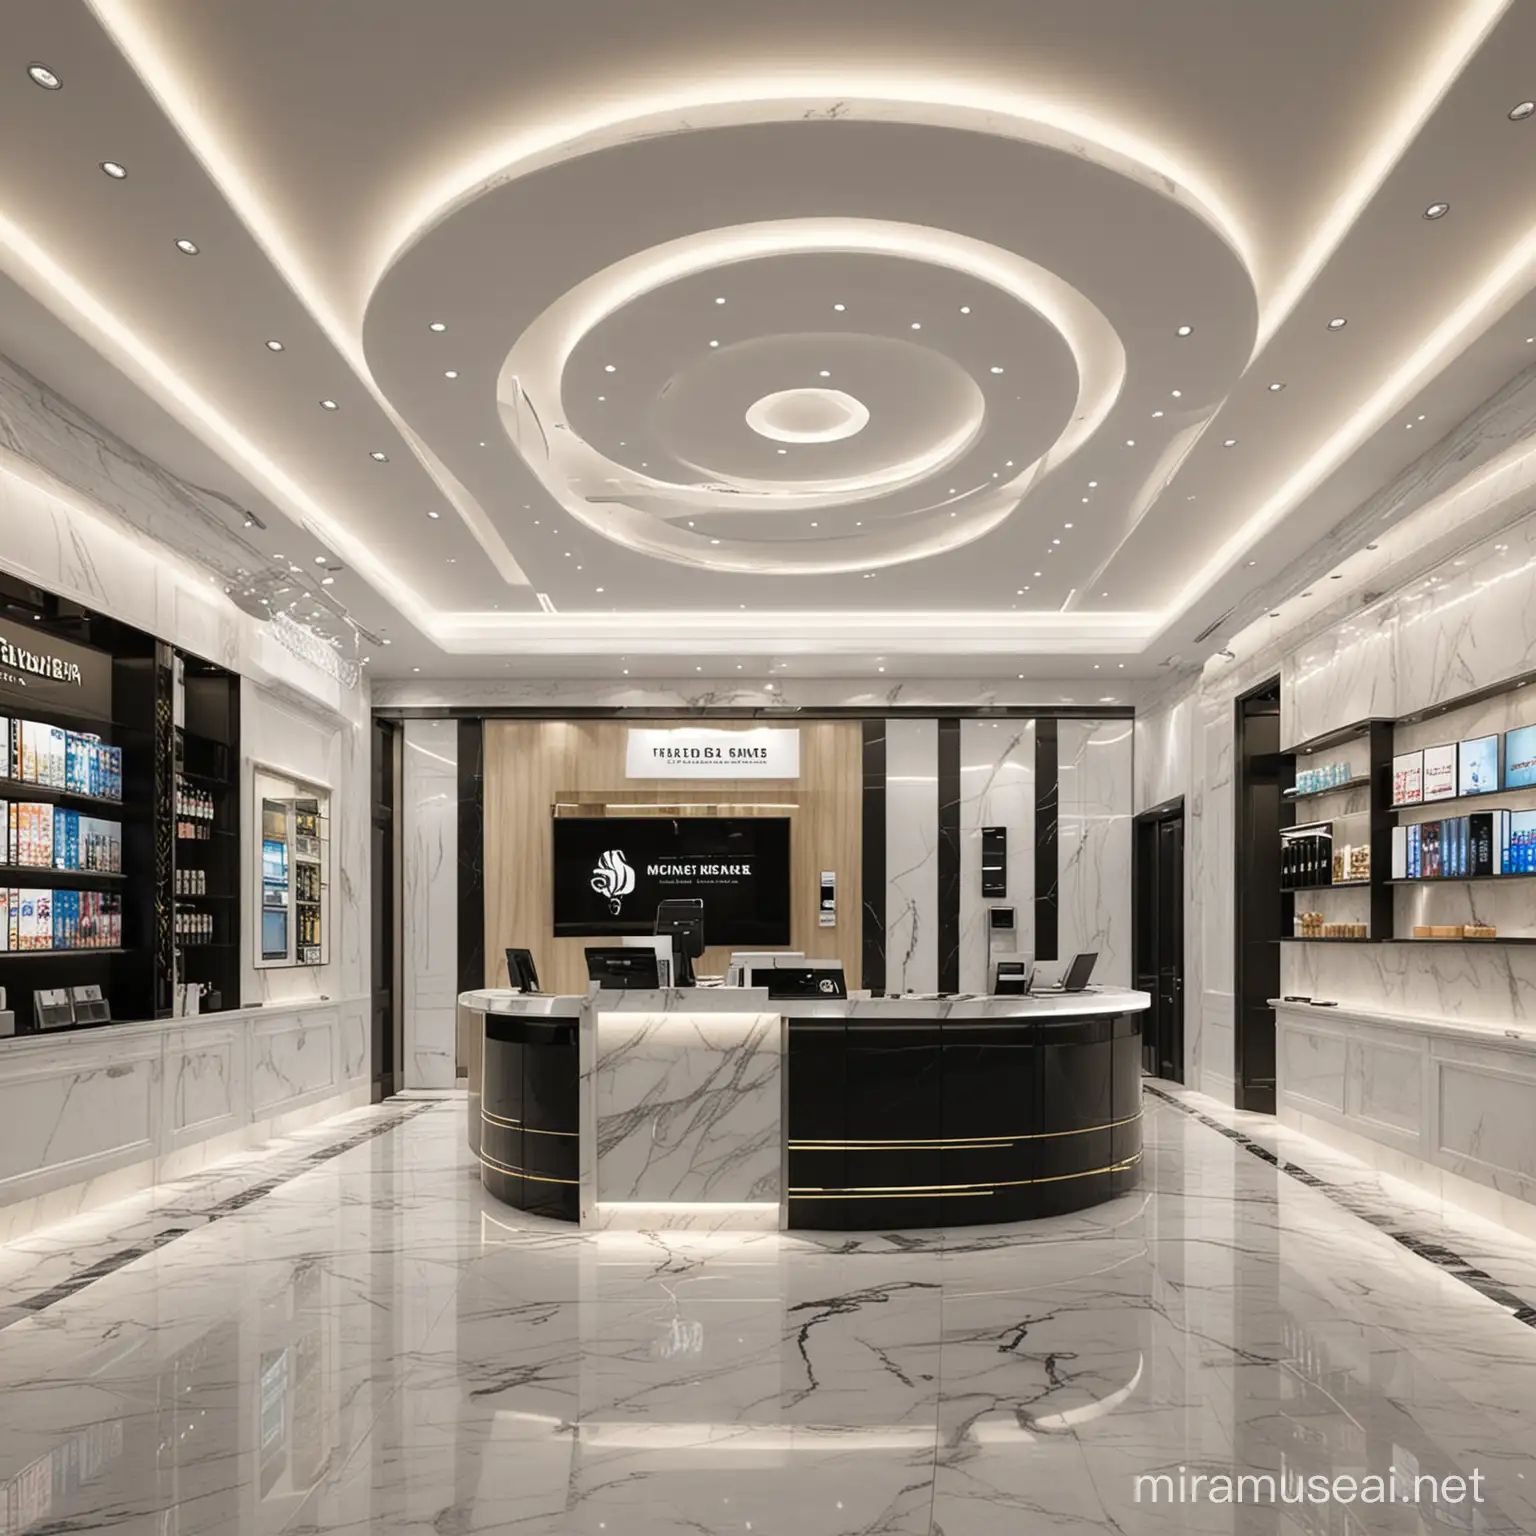 money transfer, ultra design for shop, including cellphone area, money transfer reception, floor marble , white and black, ceiling , 3d , elevation